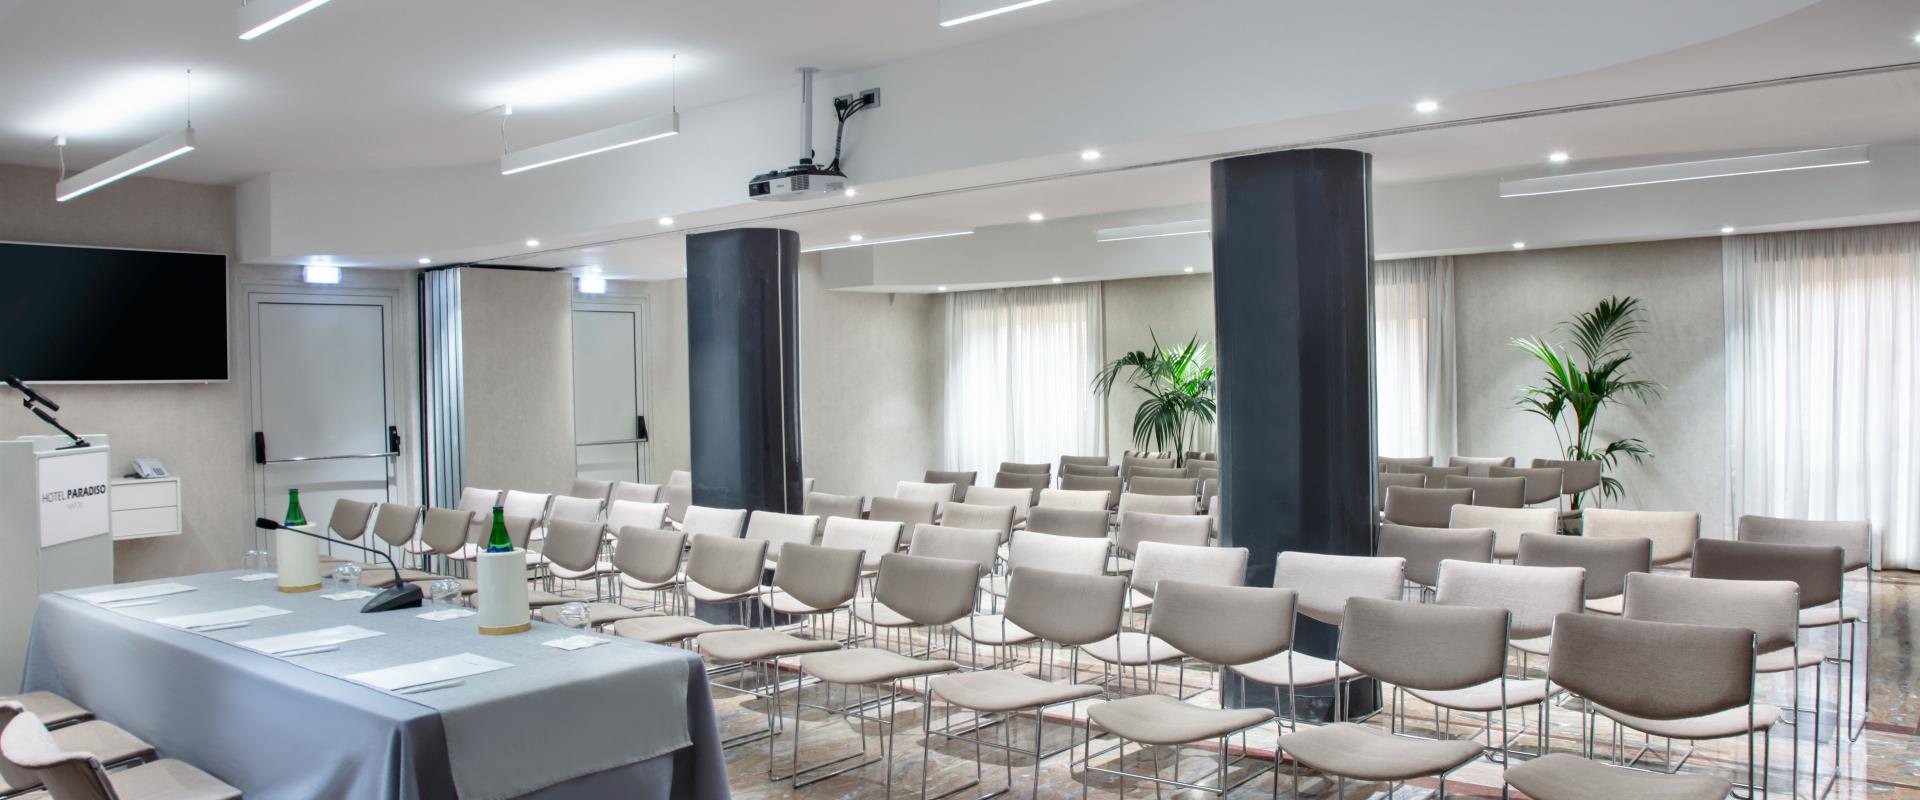 The Posillipo Meeting Room of the Hotel Paradiso can accommodate up to 80 people